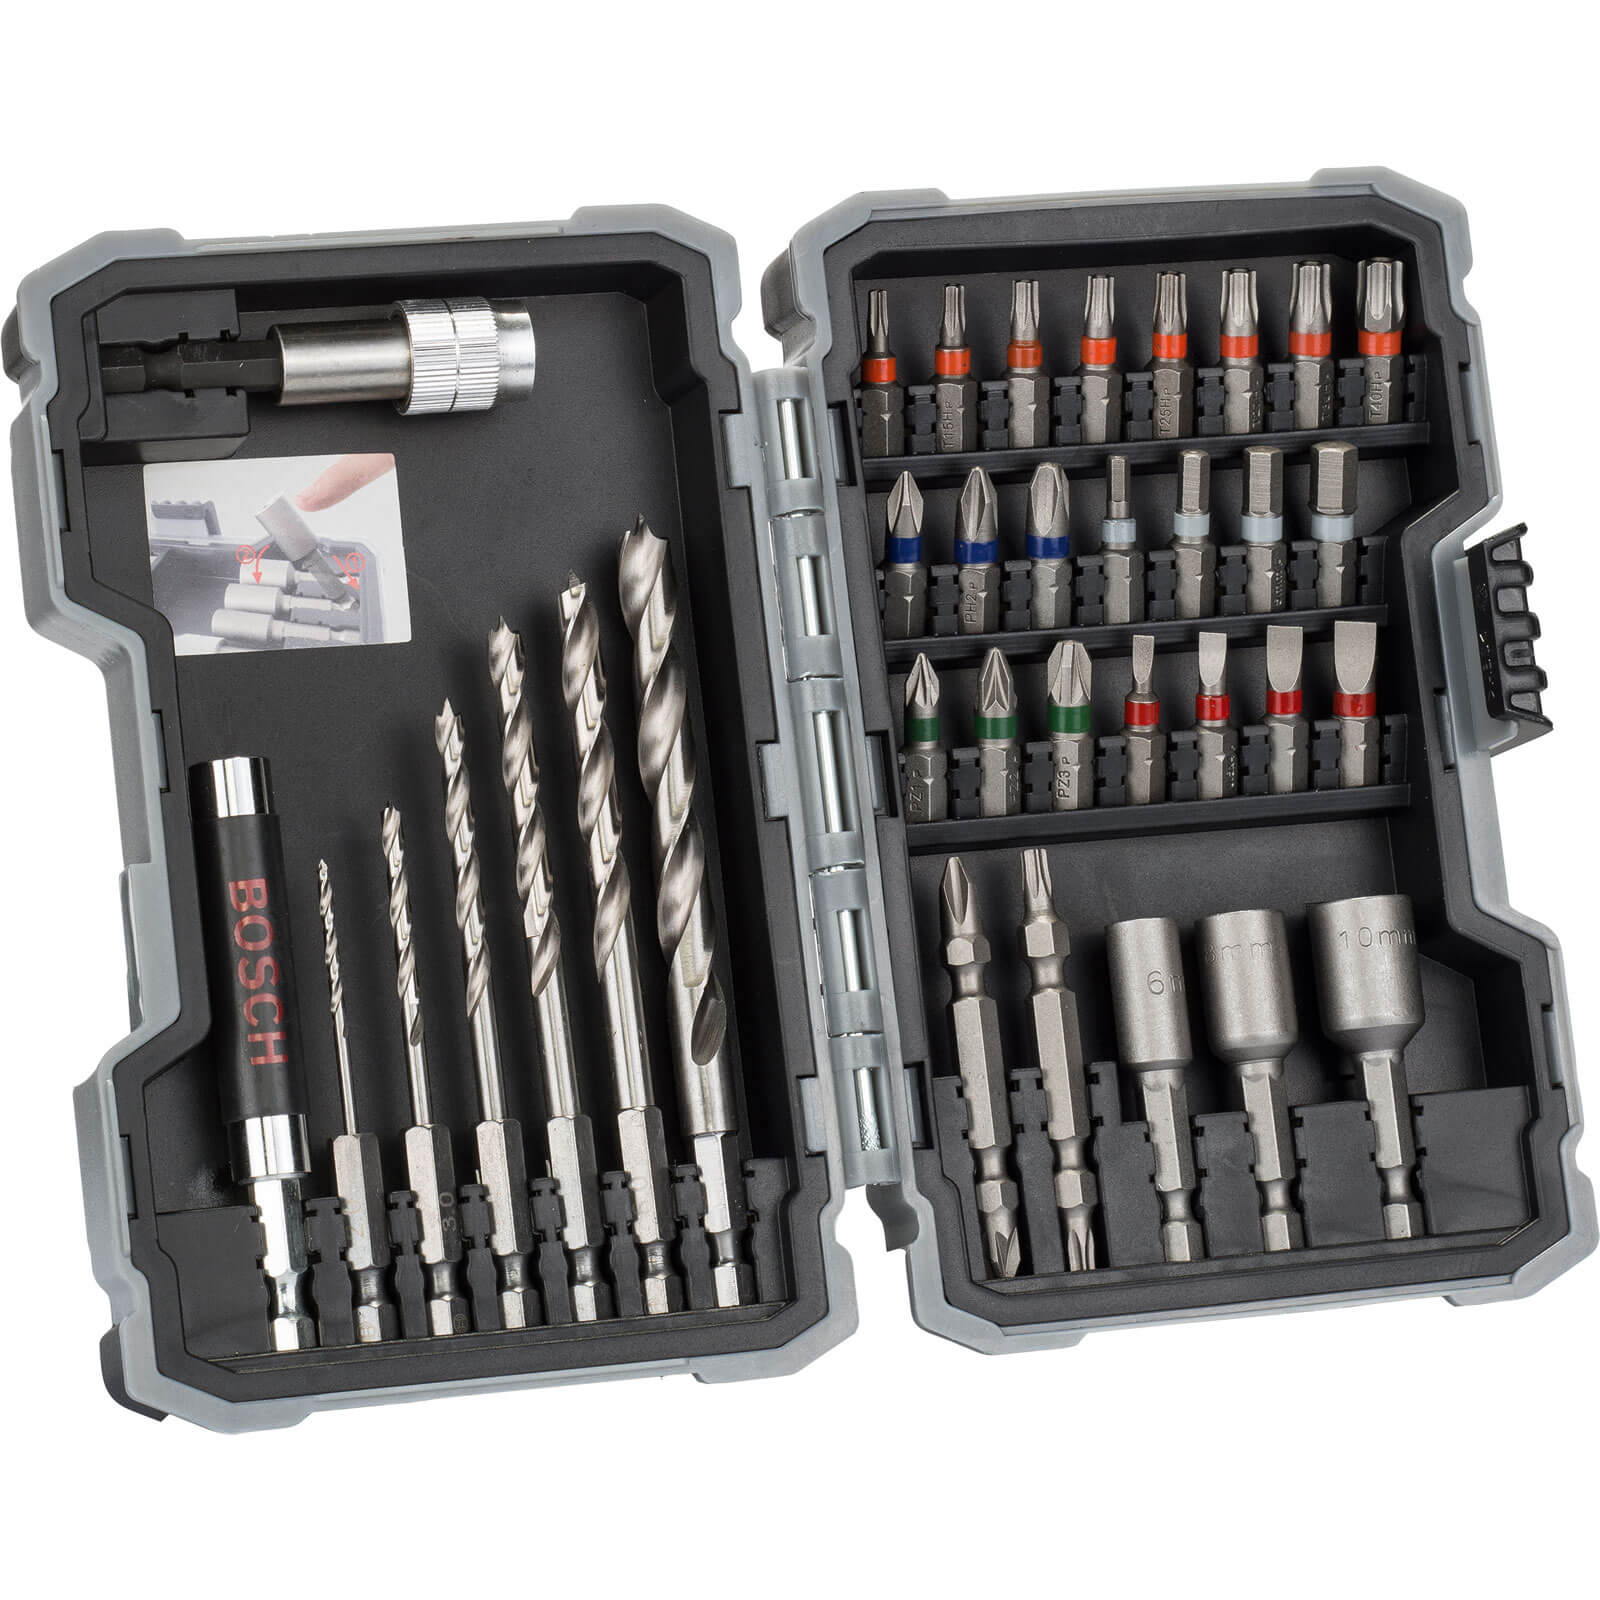 Image of Bosch 35 Piece Drill and Screwdriver Bit Set for Wood